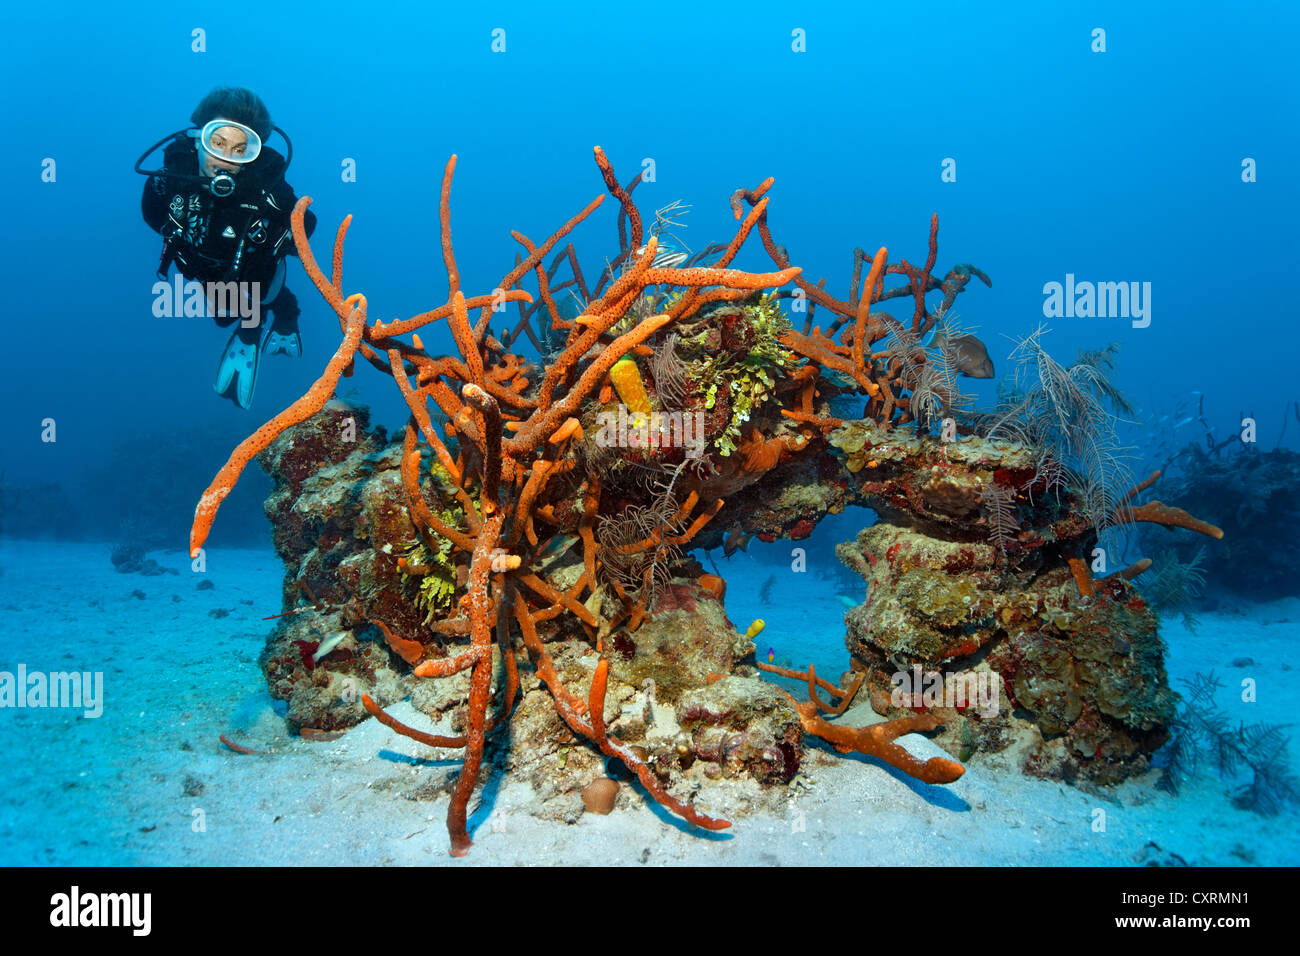 Scuba diver looking at coral reef with a variety of coral species and Row Pore Rope Sponge (Aplysina cauliformis) Stock Photo